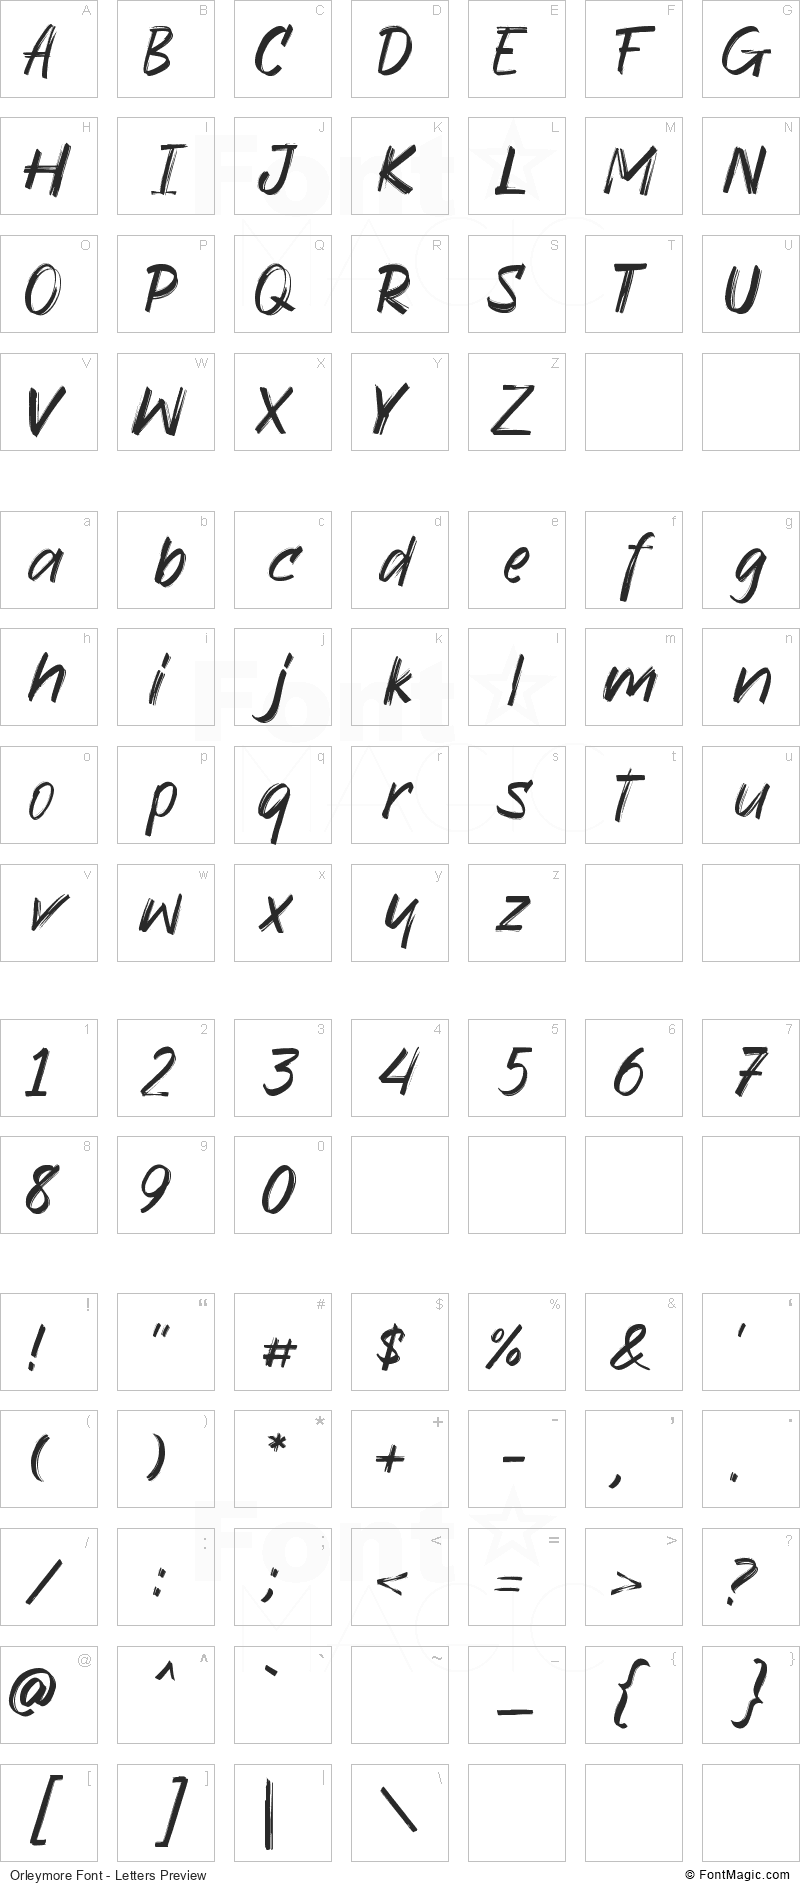 Orleymore Font - All Latters Preview Chart